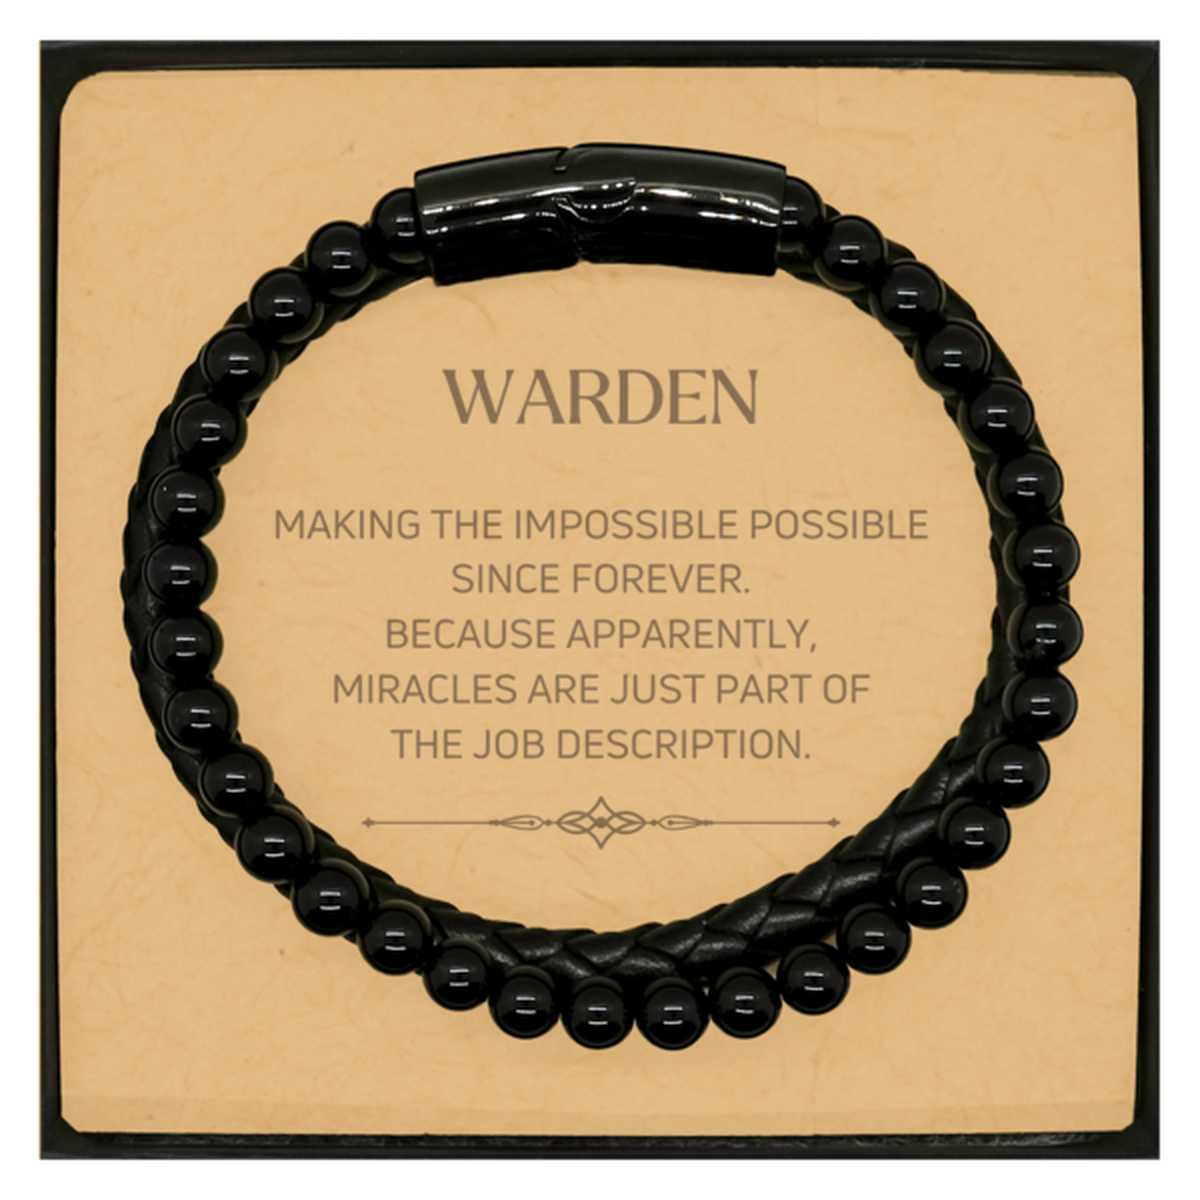 Funny Warden Gifts, Miracles are just part of the job description, Inspirational Birthday Christmas Stone Leather Bracelets For Warden, Men, Women, Coworkers, Friends, Boss